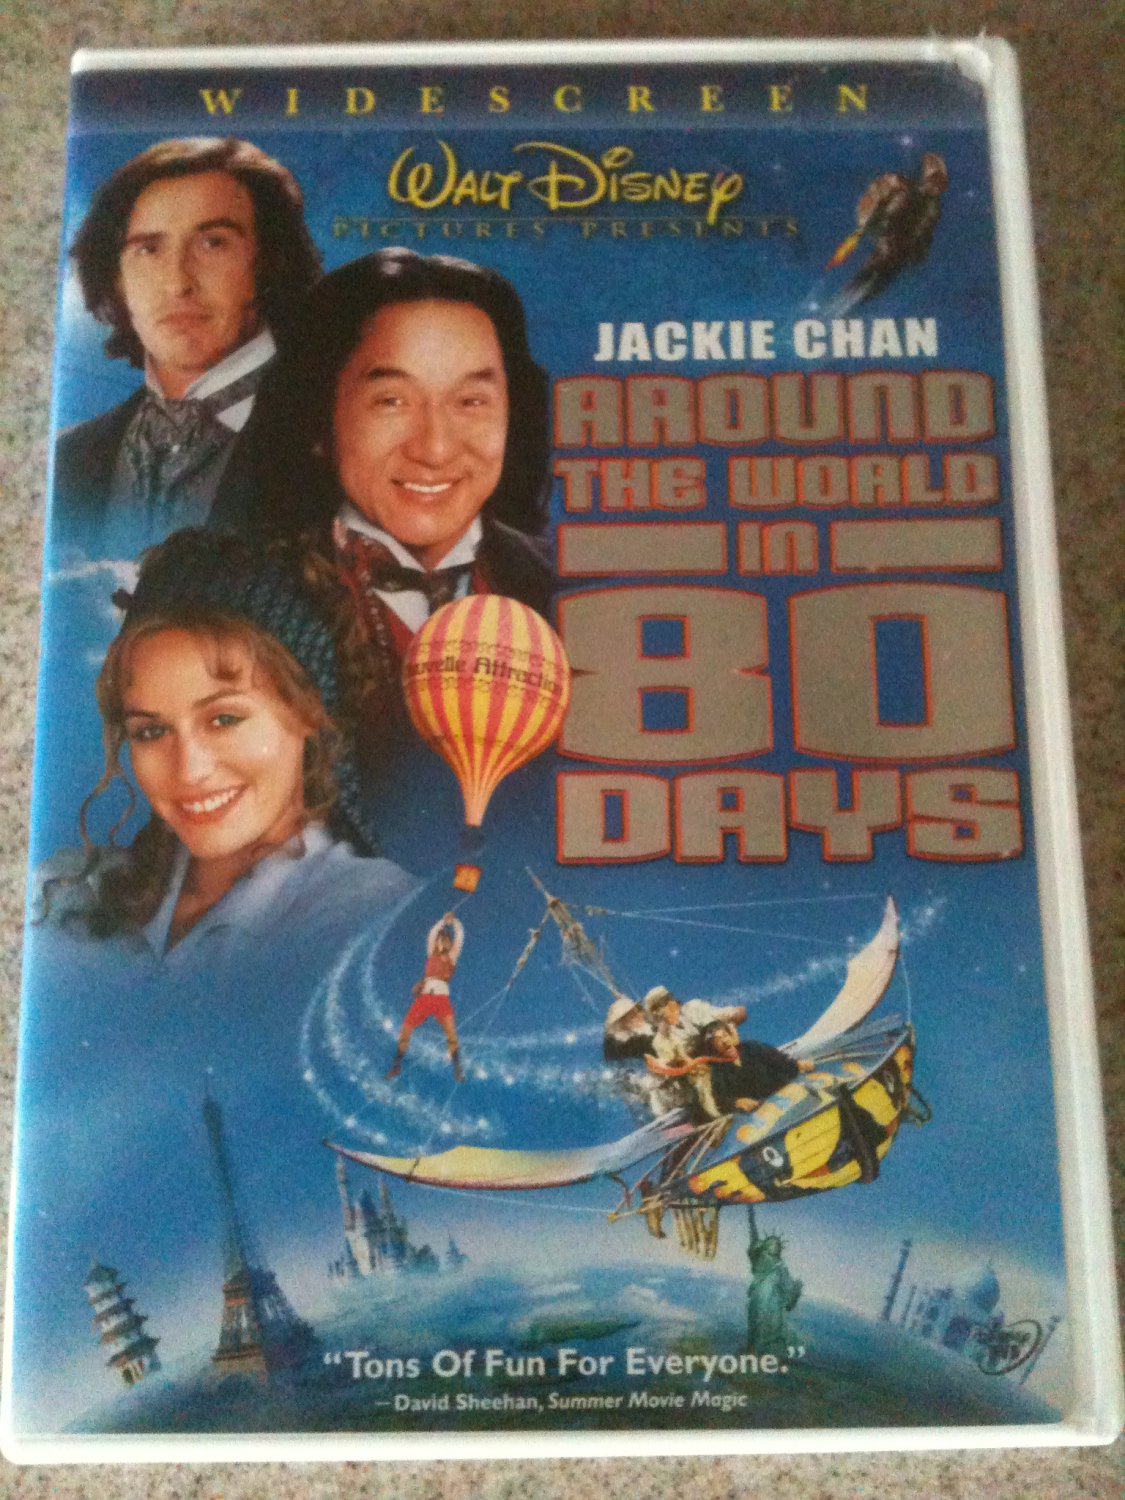 Around the World in 80 Days (DVD, 2004, Widescreen) VG with insert. Jackie Chan